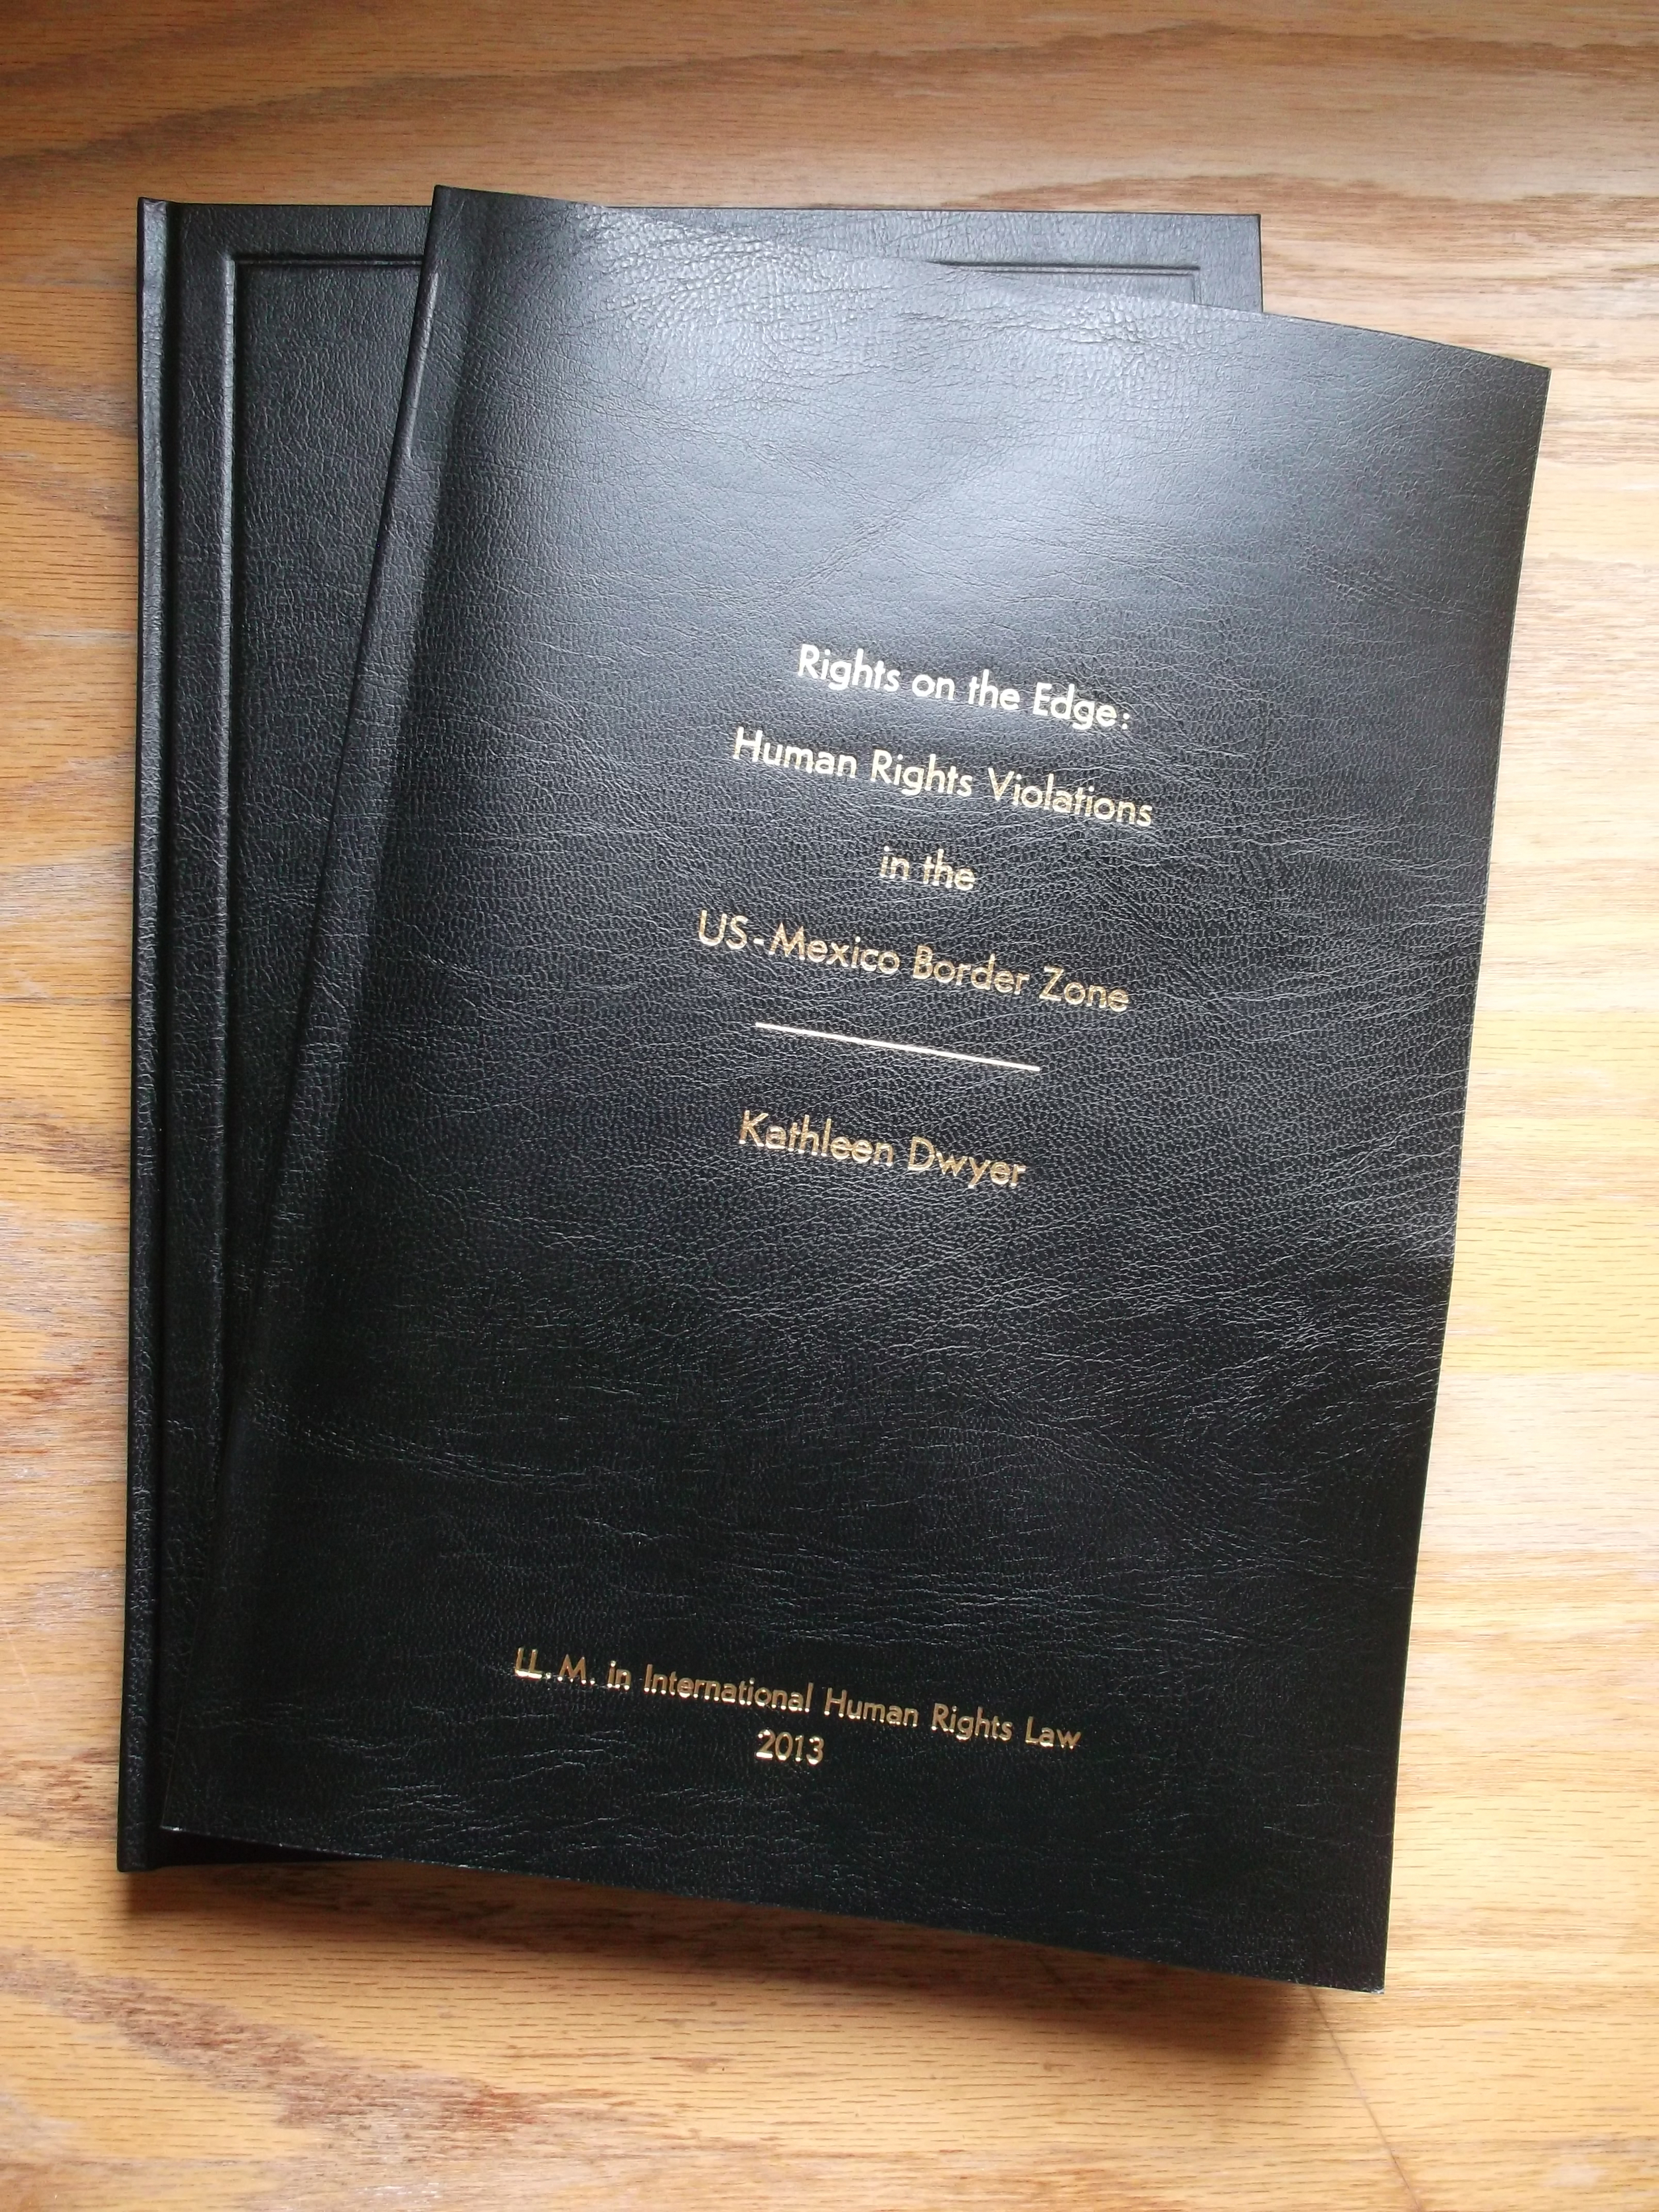 The printed and bound version of my Master's thesis in Human Rights Law at the National University of Ireland in Galway.